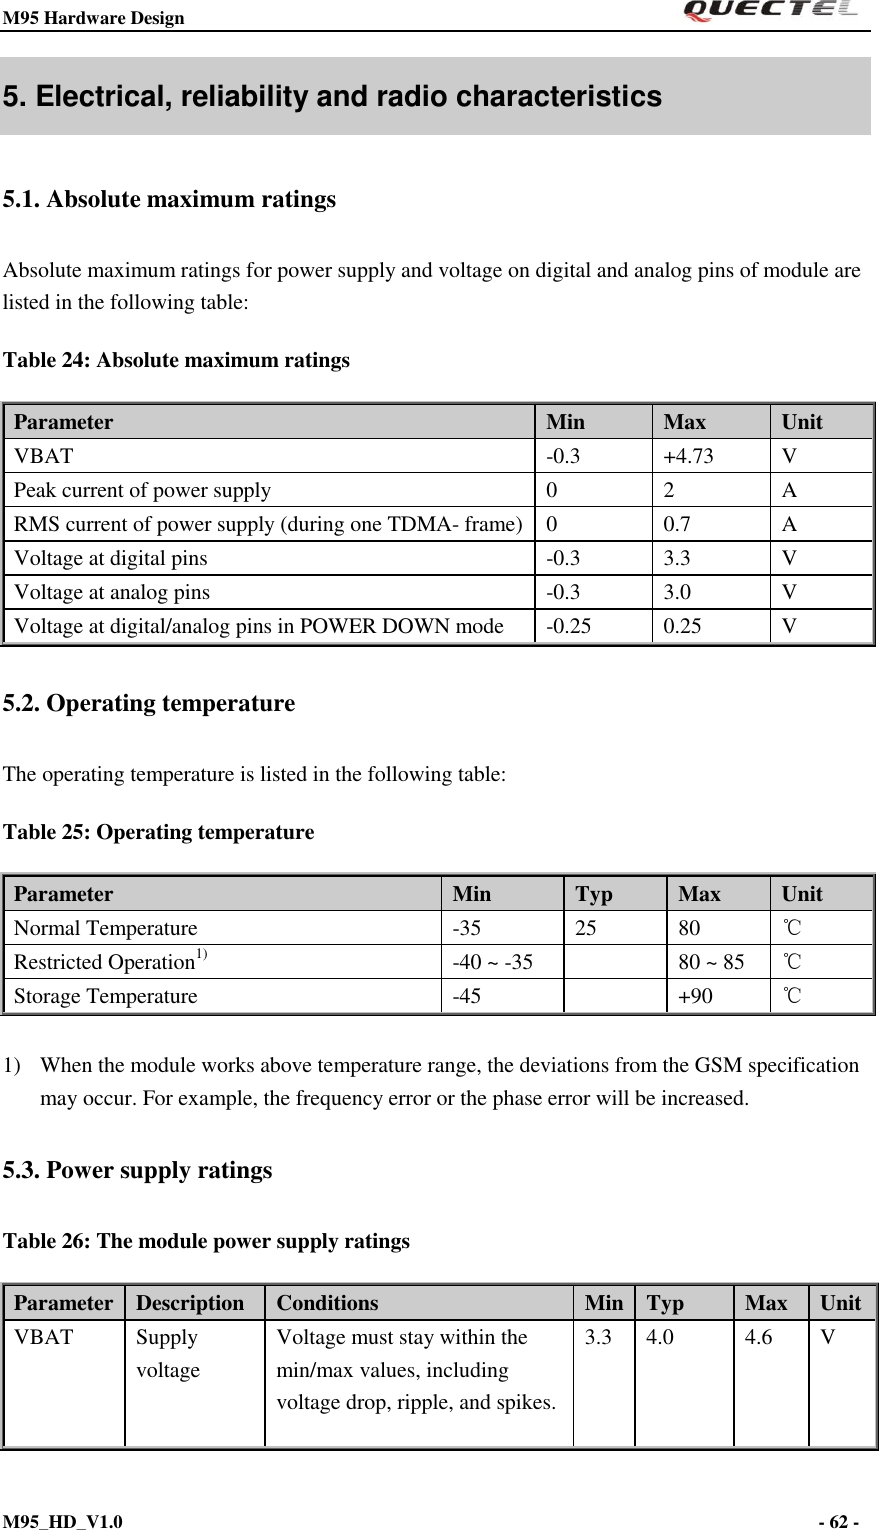 M95 Hardware Design                                                       M95_HD_V1.0                                                                - 62 -    5. Electrical, reliability and radio characteristics 5.1. Absolute maximum ratings Absolute maximum ratings for power supply and voltage on digital and analog pins of module are listed in the following table: Table 24: Absolute maximum ratings Parameter Min Max Unit VBAT -0.3 +4.73 V Peak current of power supply 0 2 A RMS current of power supply (during one TDMA- frame) 0 0.7 A Voltage at digital pins -0.3 3.3 V Voltage at analog pins -0.3 3.0 V Voltage at digital/analog pins in POWER DOWN mode -0.25 0.25 V 5.2. Operating temperature The operating temperature is listed in the following table: Table 25: Operating temperature Parameter Min Typ Max Unit Normal Temperature -35 25 80 ℃ Restricted Operation1) -40 ~ -35  80 ~ 85 ℃ Storage Temperature -45  +90 ℃  1) When the module works above temperature range, the deviations from the GSM specification may occur. For example, the frequency error or the phase error will be increased. 5.3. Power supply ratings   Table 26: The module power supply ratings Parameter Description Conditions Min Typ Max Unit VBAT Supply voltage Voltage must stay within the min/max values, including voltage drop, ripple, and spikes. 3.3 4.0 4.6 V 